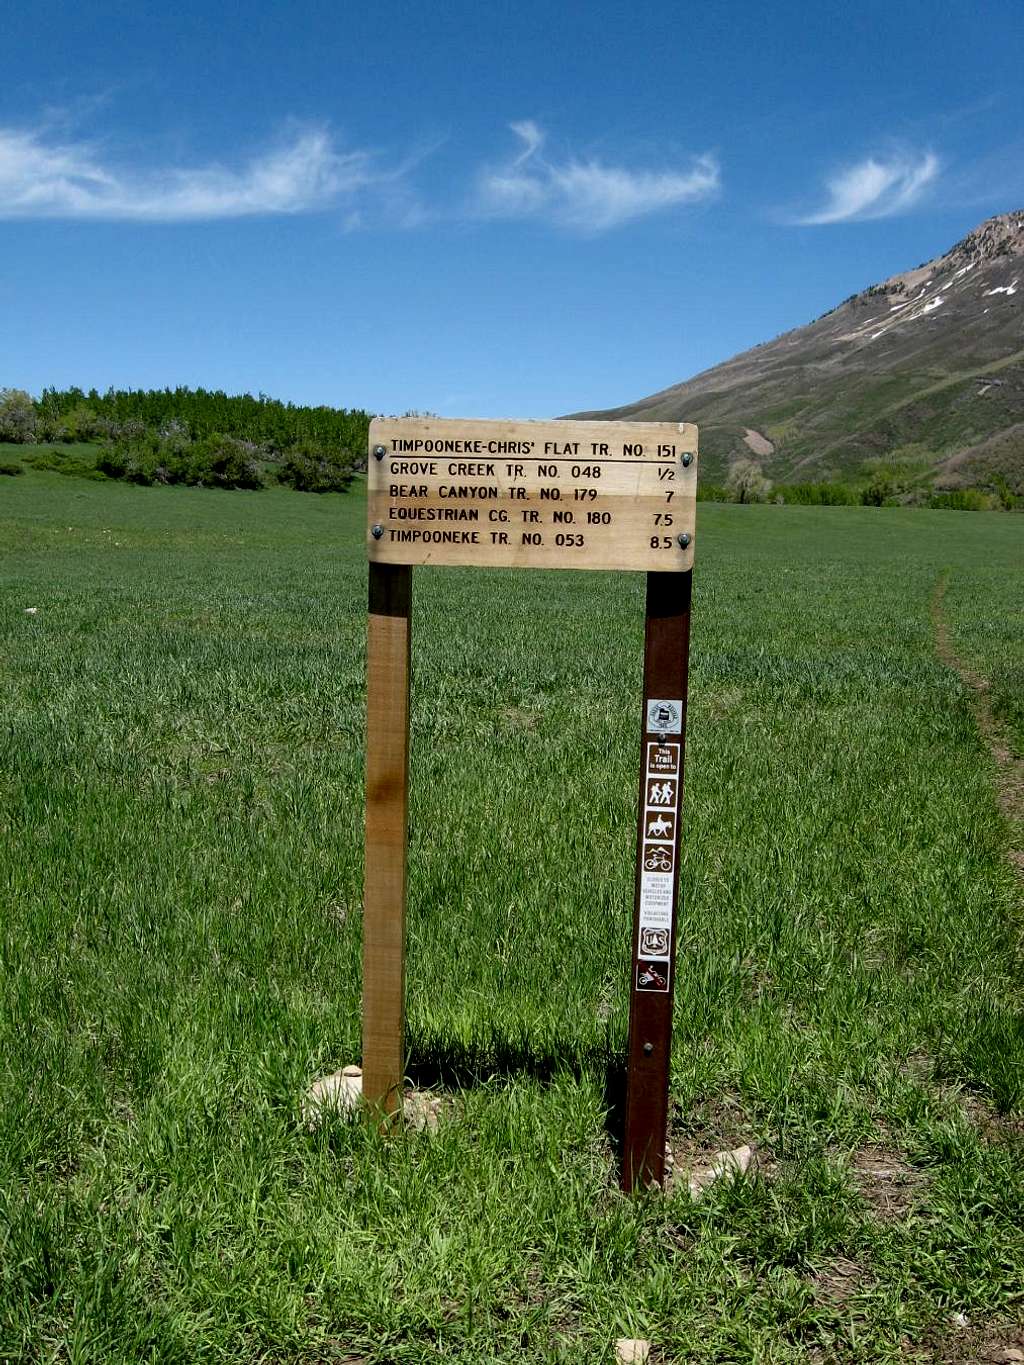 New sign directs the hiker